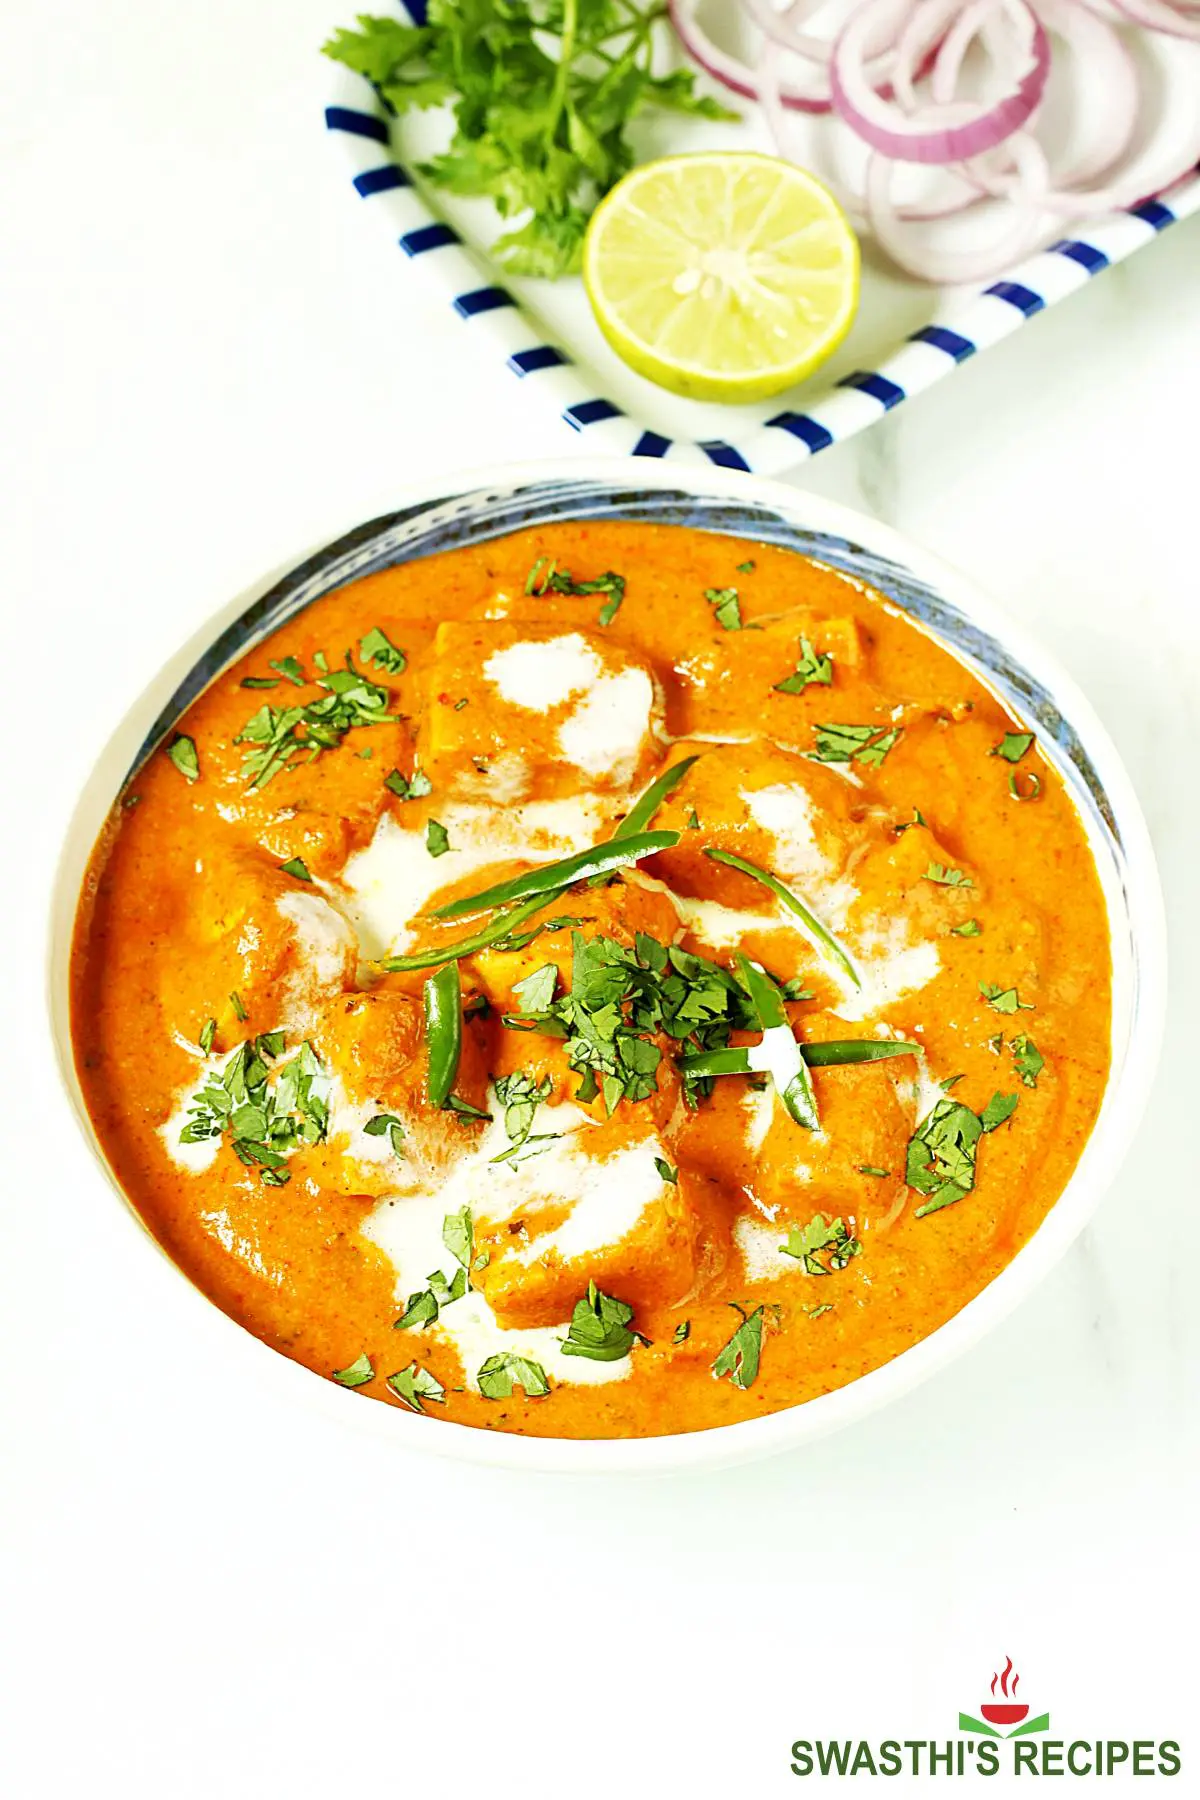 Paneer Recipes - collection of dishes made with paneer